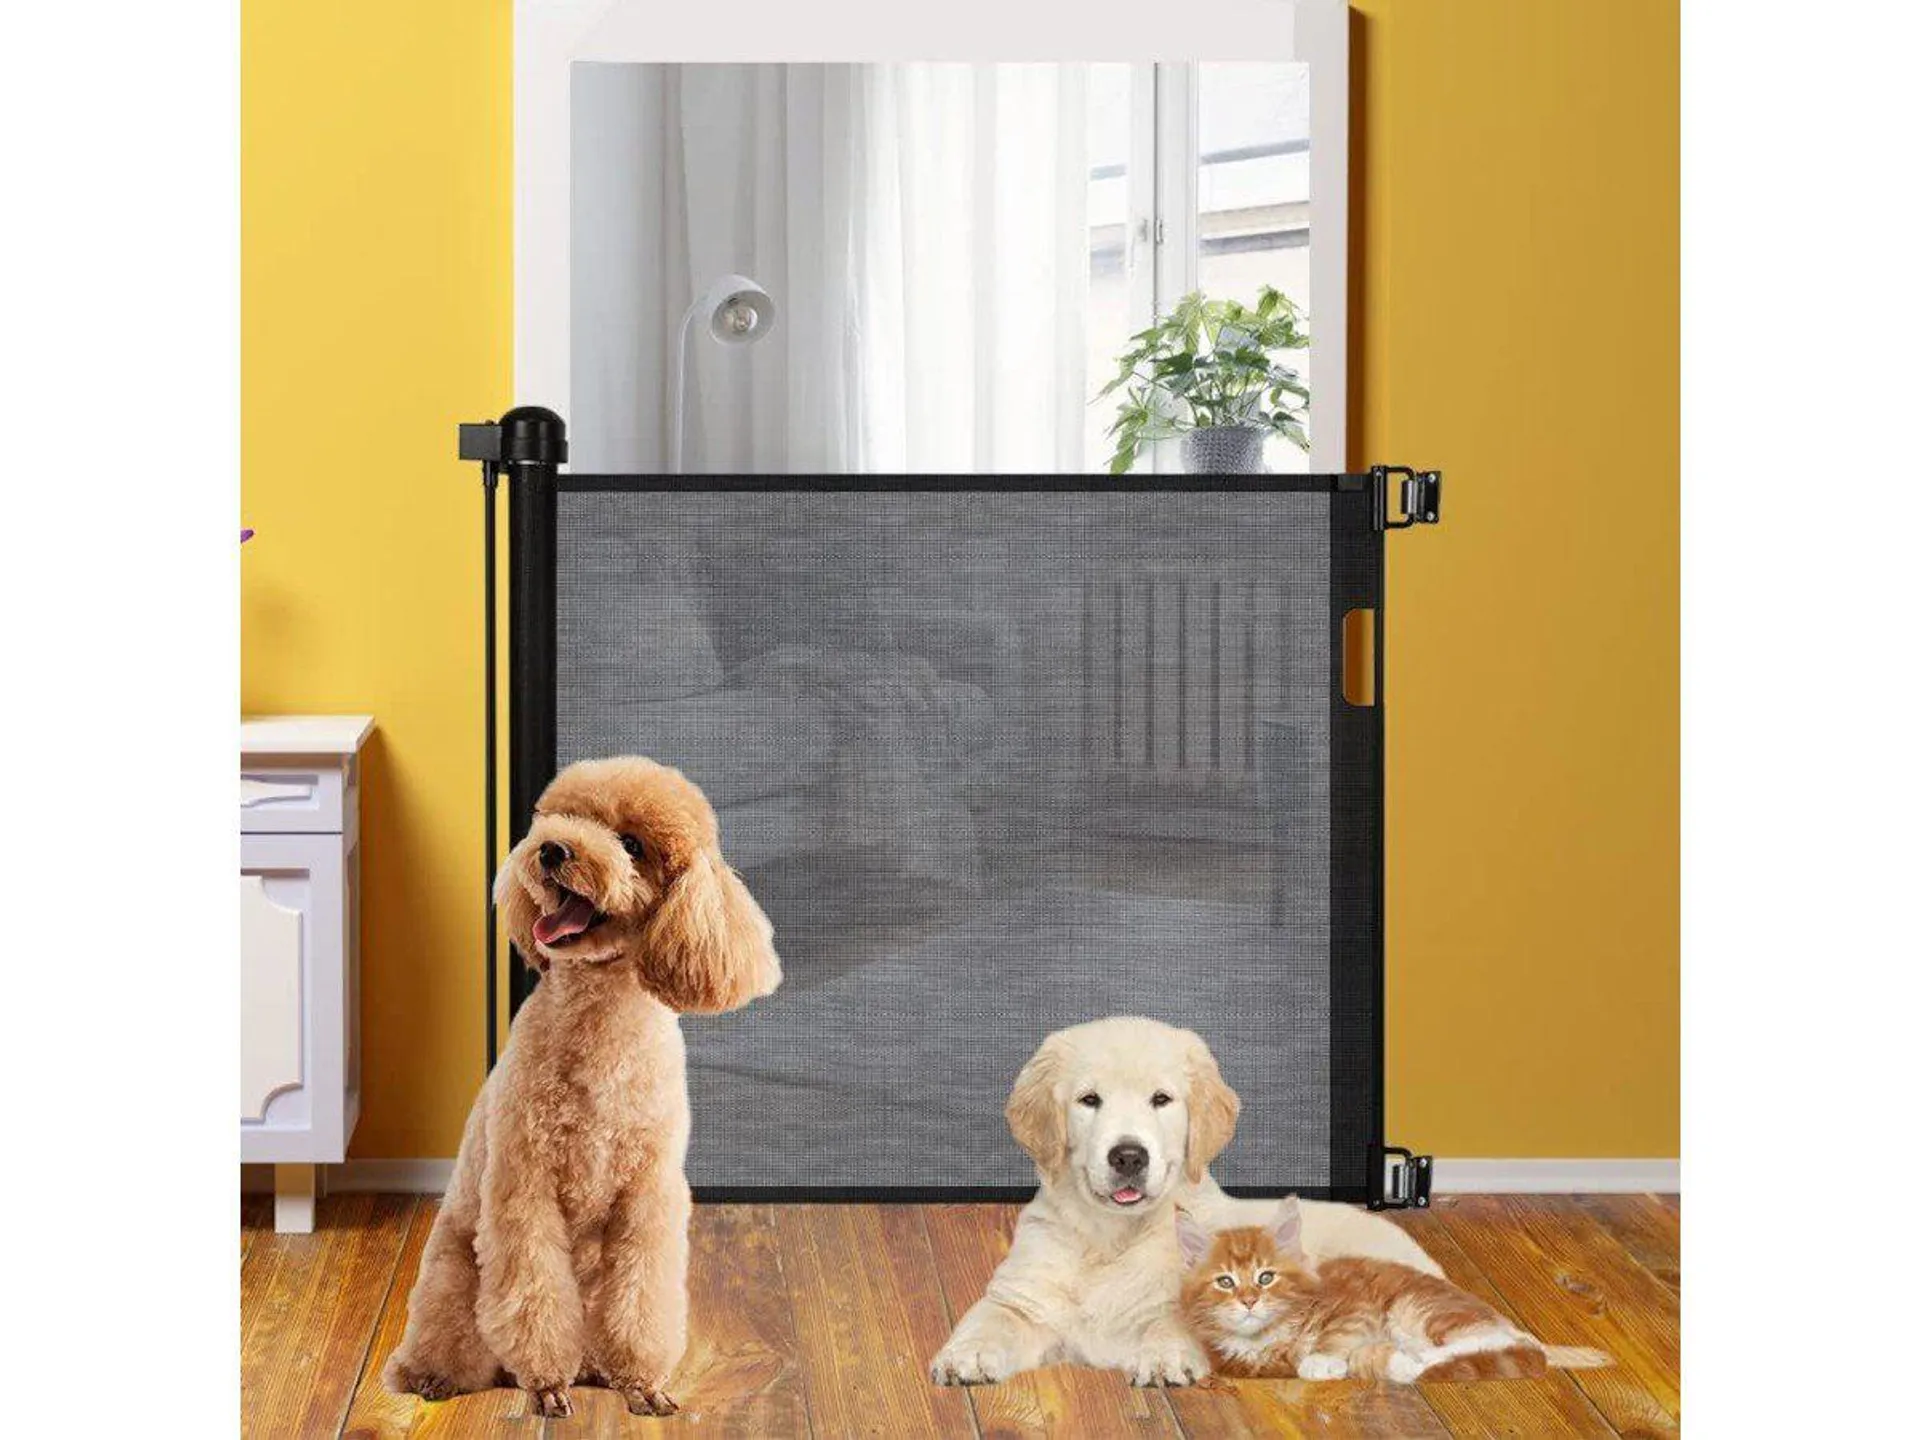 MPM Retractable Pet Gate 33-Inches Tall, Extends up to 55 Inches Extra Wide Pet Friendly Indoor Outdoor Mesh Gates Dog Cate for Doorways, Hallways, Stairs, Bedroom, Living Room, Indoor, Outdoor